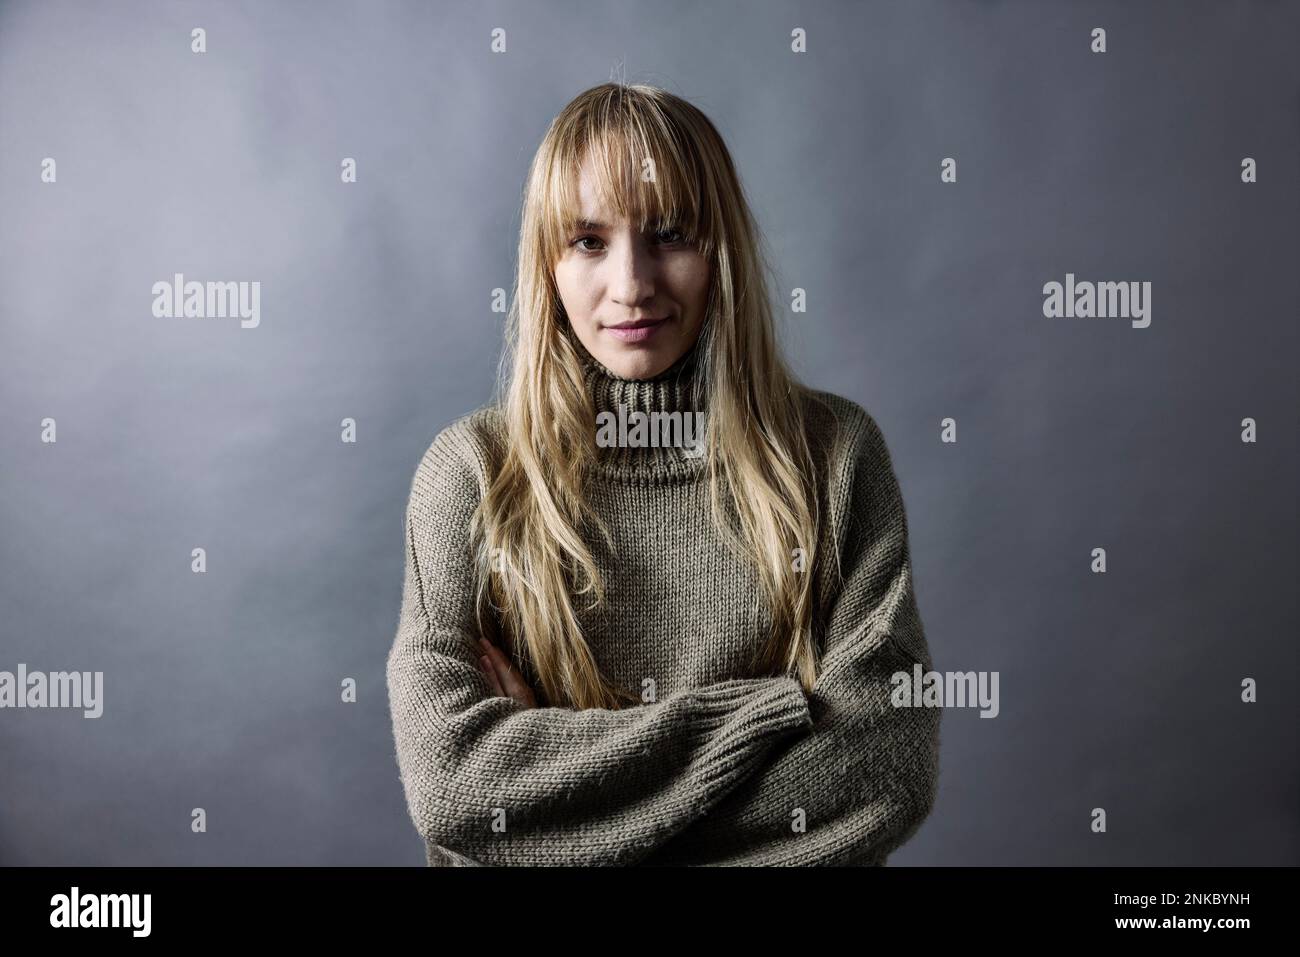 Woman with long blond hair and warm woollen jumper crosses her arms, portrait, studio shot Stock Photo